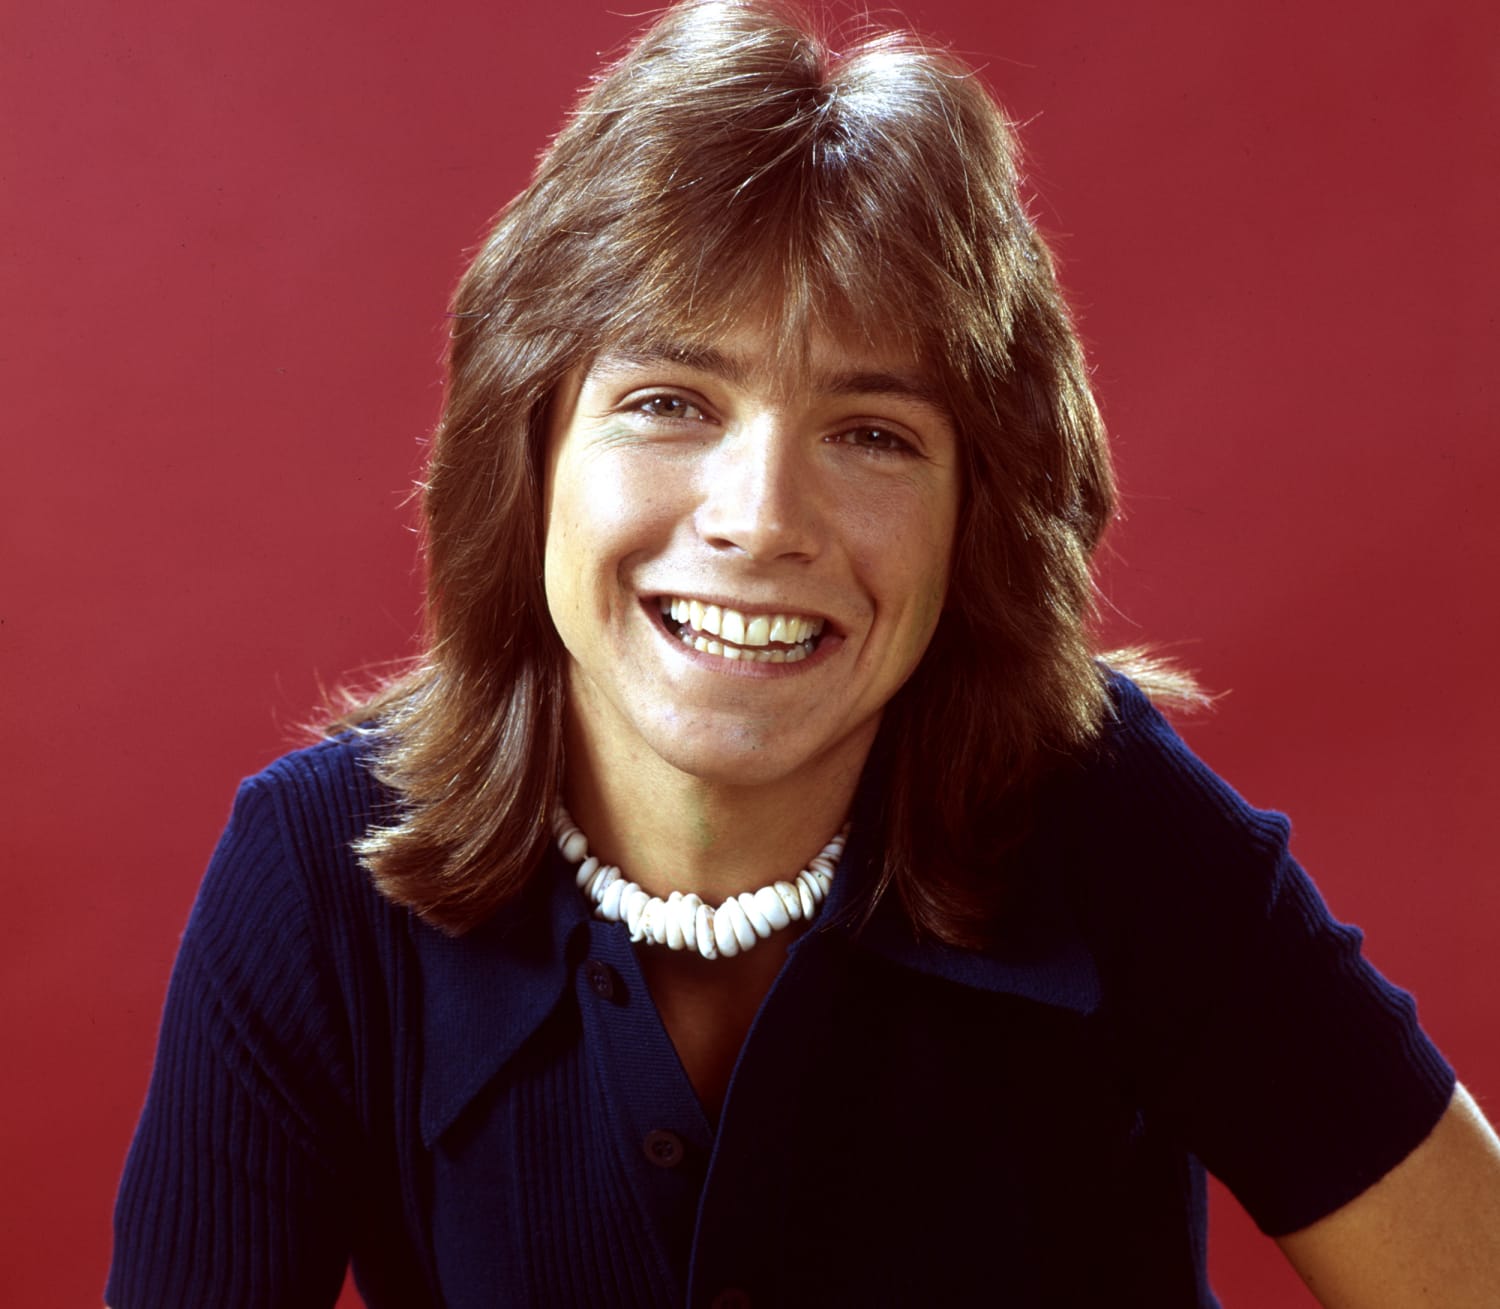 David Cassidy, 1970s teen idol, has died at 67